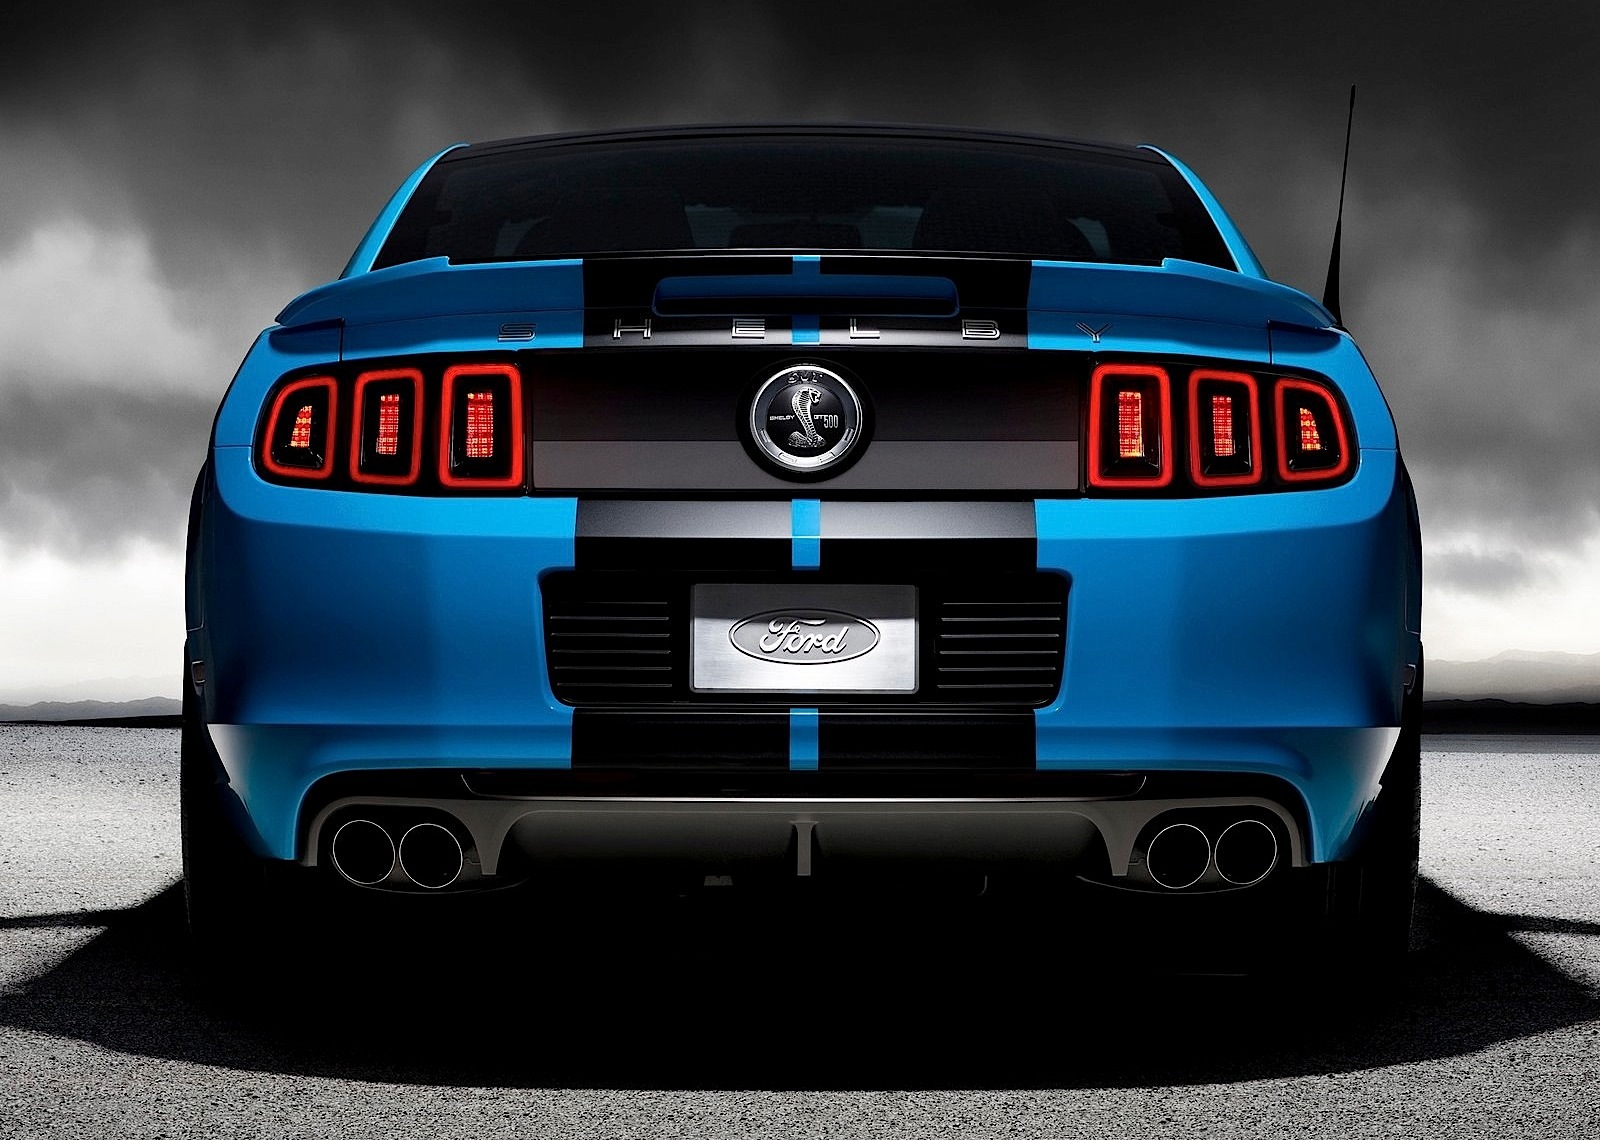 Ford Mustang Gt500 Wallpapers Vehicles Hq Ford Mustang Gt500 Pictures 4k Wallpapers 2019